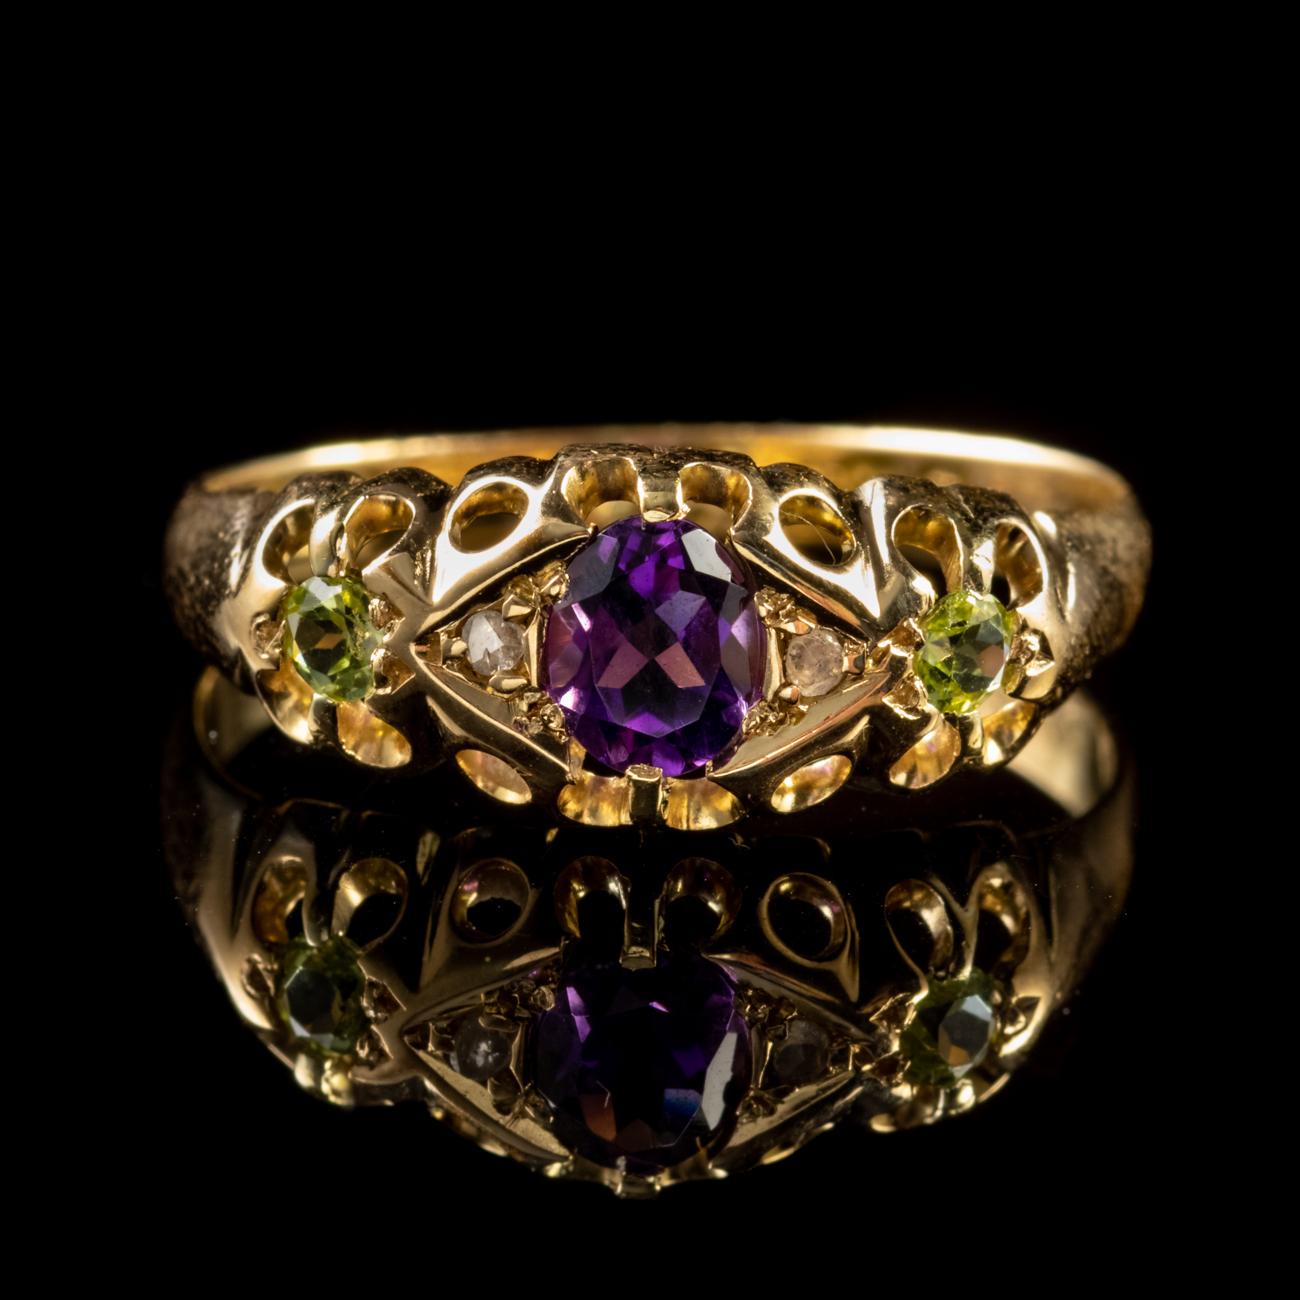 This beautiful Antique Edwardian Suffragette ring has been commissioned in 15ct Yellow Gold and set with a beautiful central 0.25ct Amethyst. Flanking the Amethyst are two wonderful sparkling Diamonds and further towards the shoulders are two 0.10ct